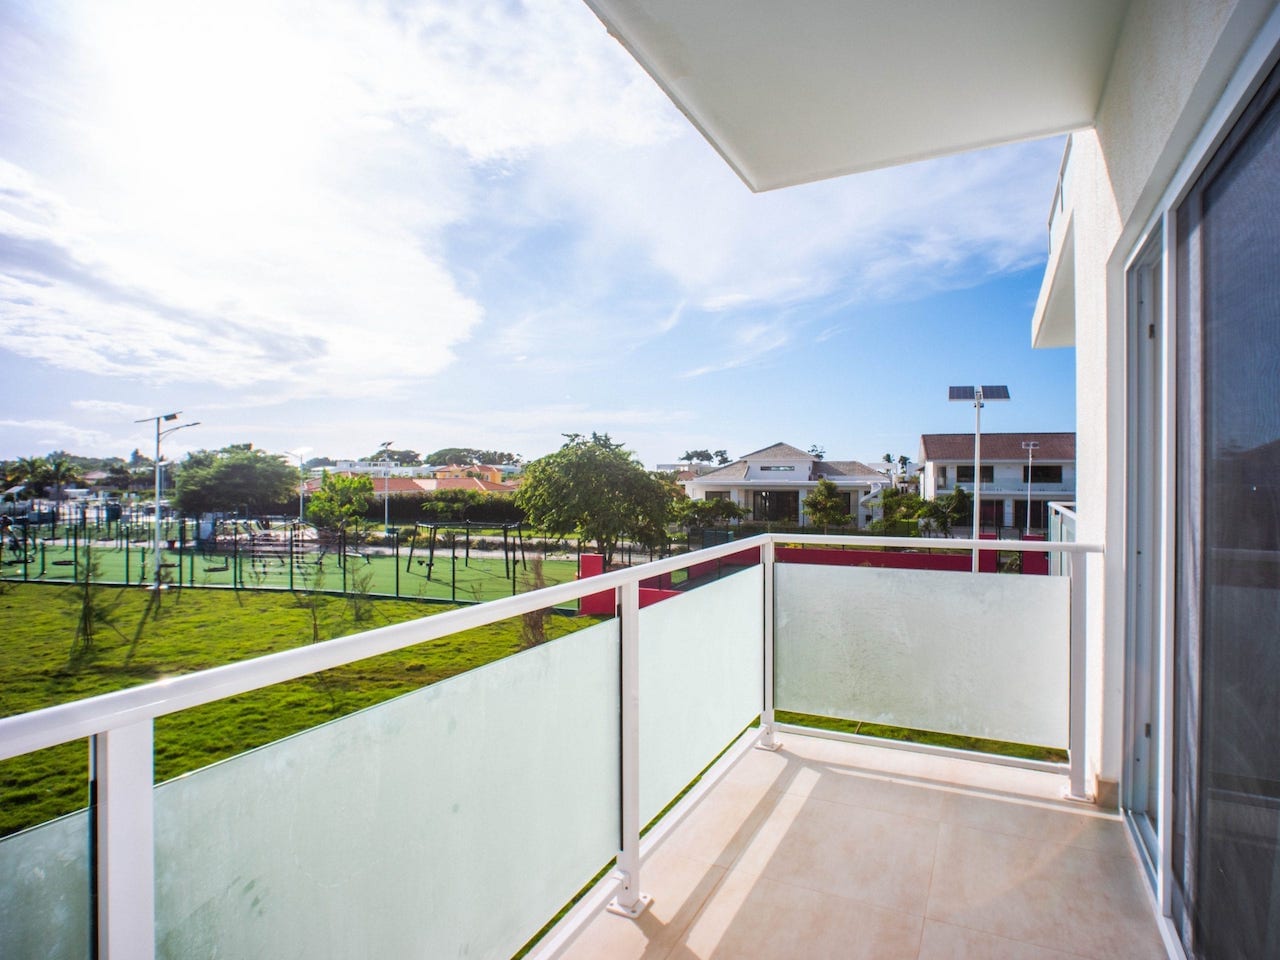 Furnished Studio In Coastal Gated Community balcony view of green space